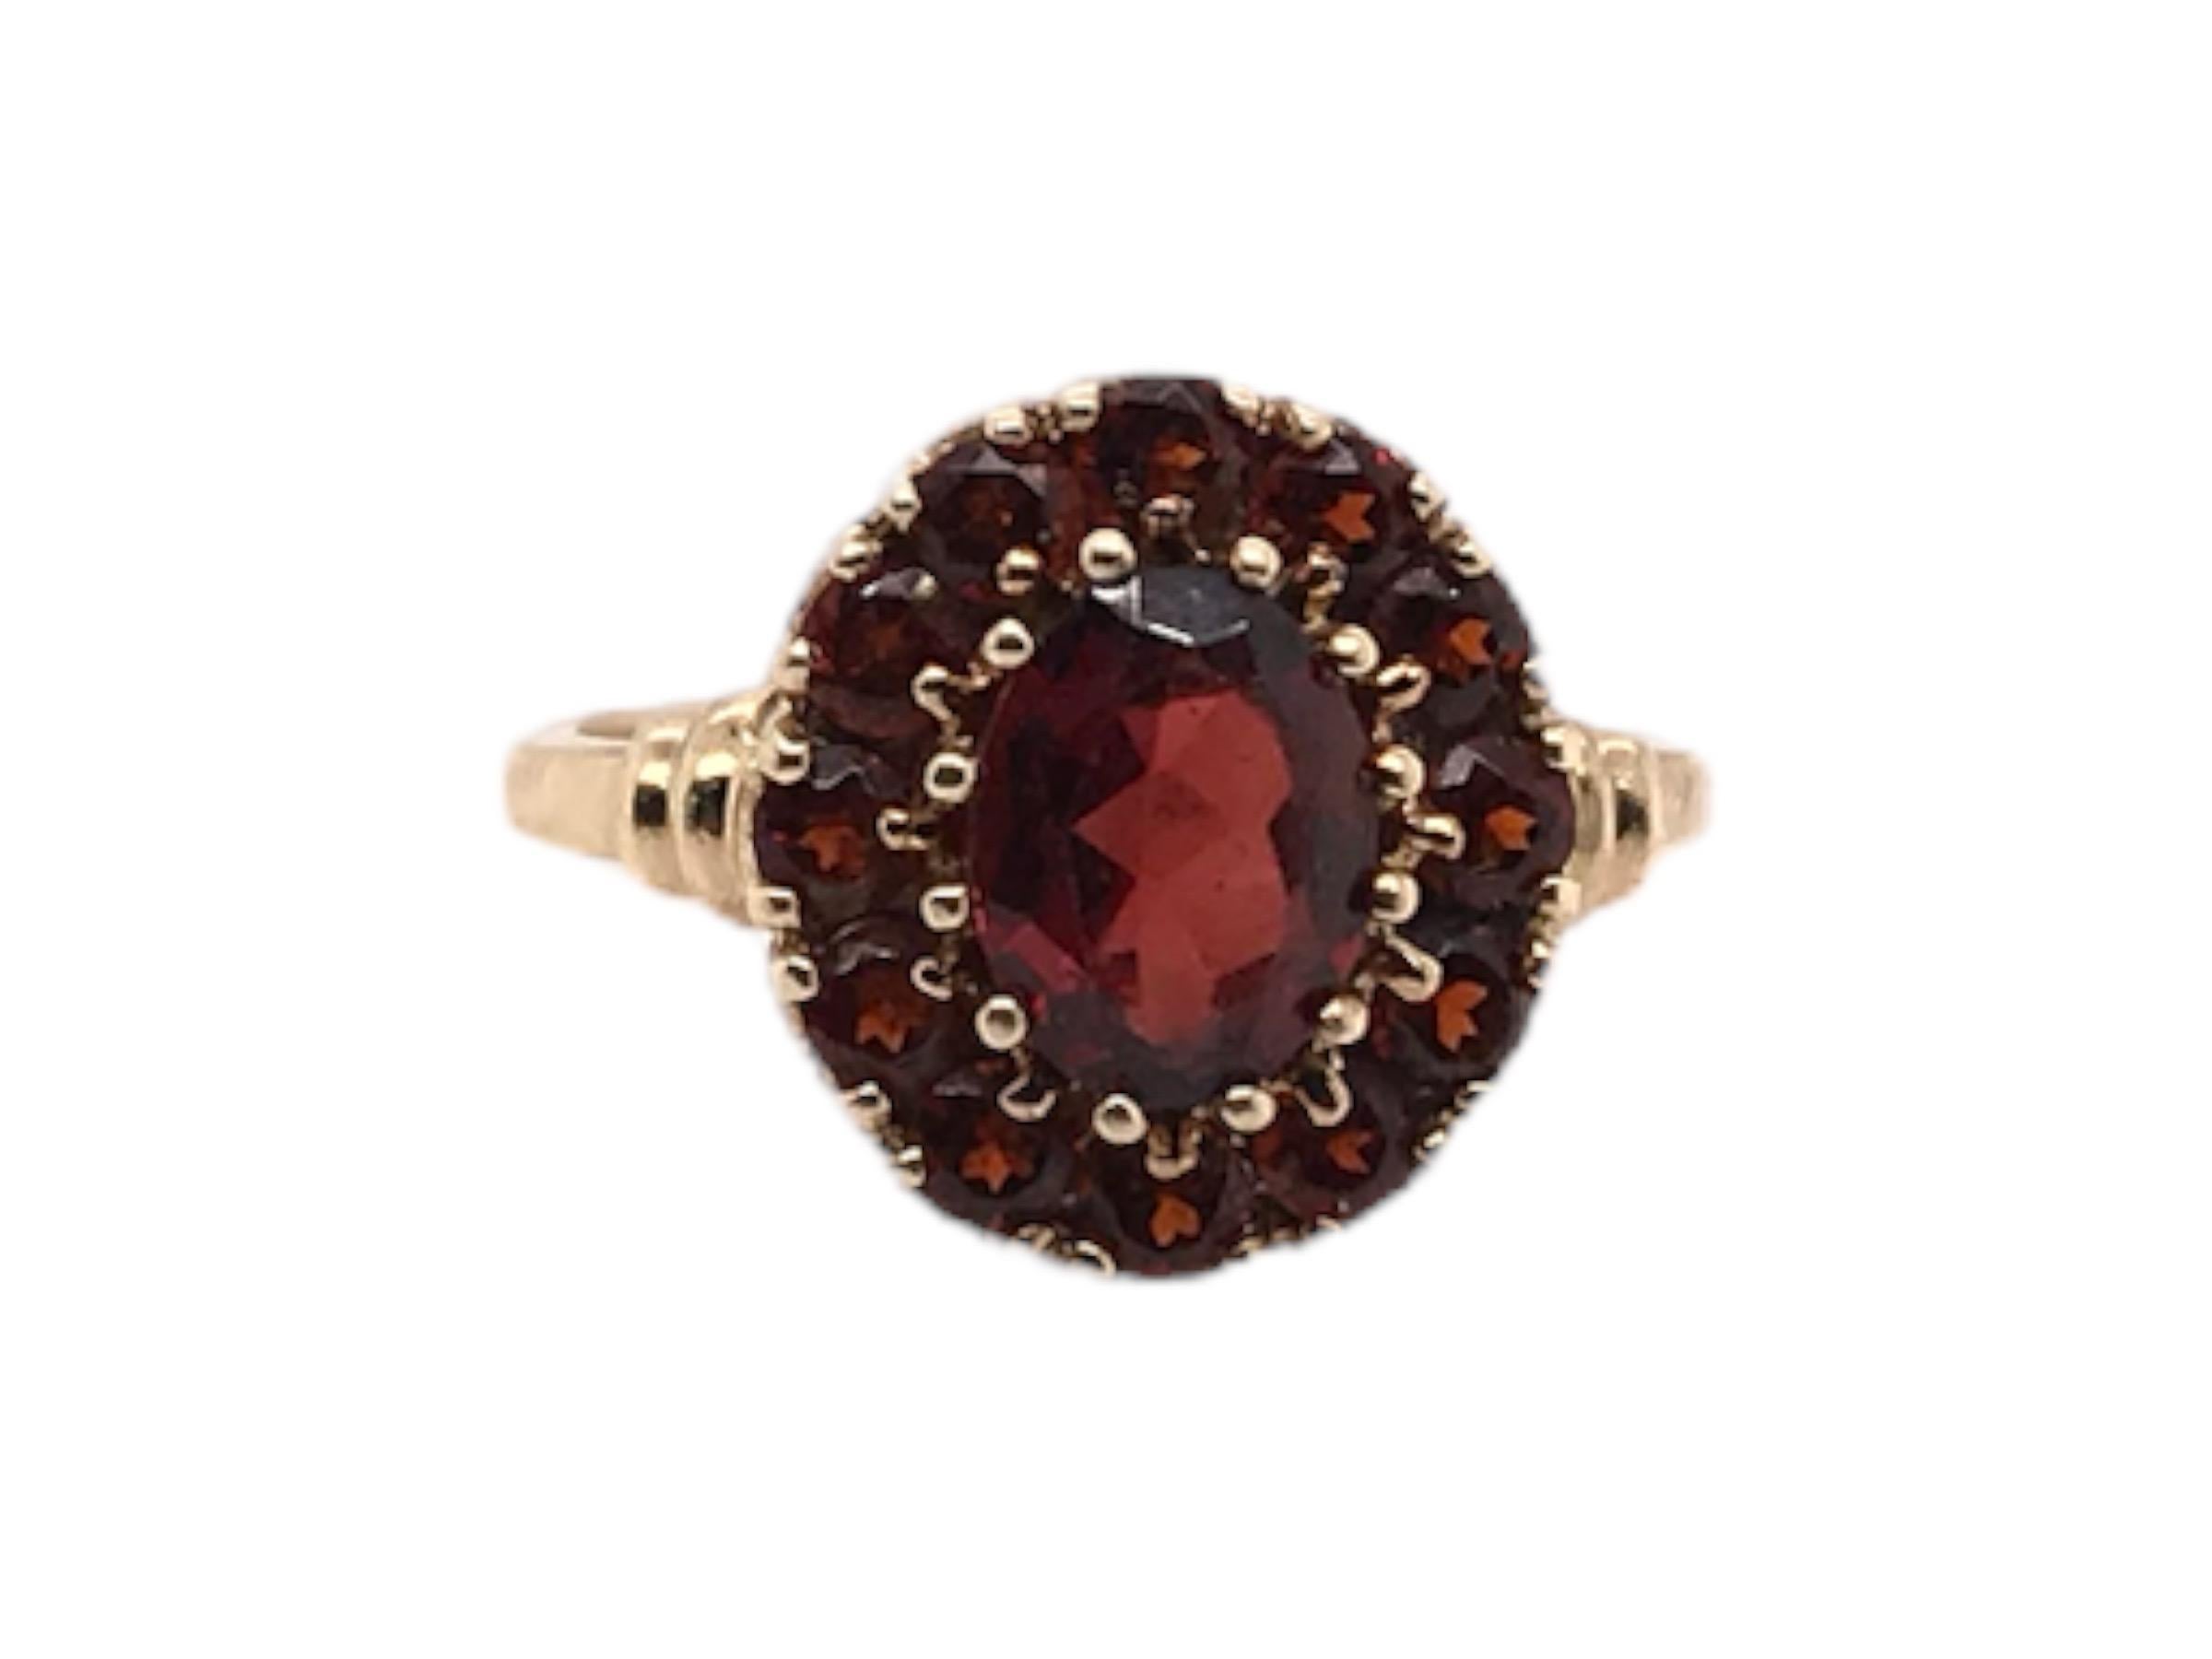 This vintage beauty is from the Retro Era, 1940 - 1960. Made in 10K yellow Gold. She is absolutely perfect for everyday wear! 
The setting features 1 center oval shaped garnet gemstone surrounded by 12 round garnet gemstones. 

Ring Top